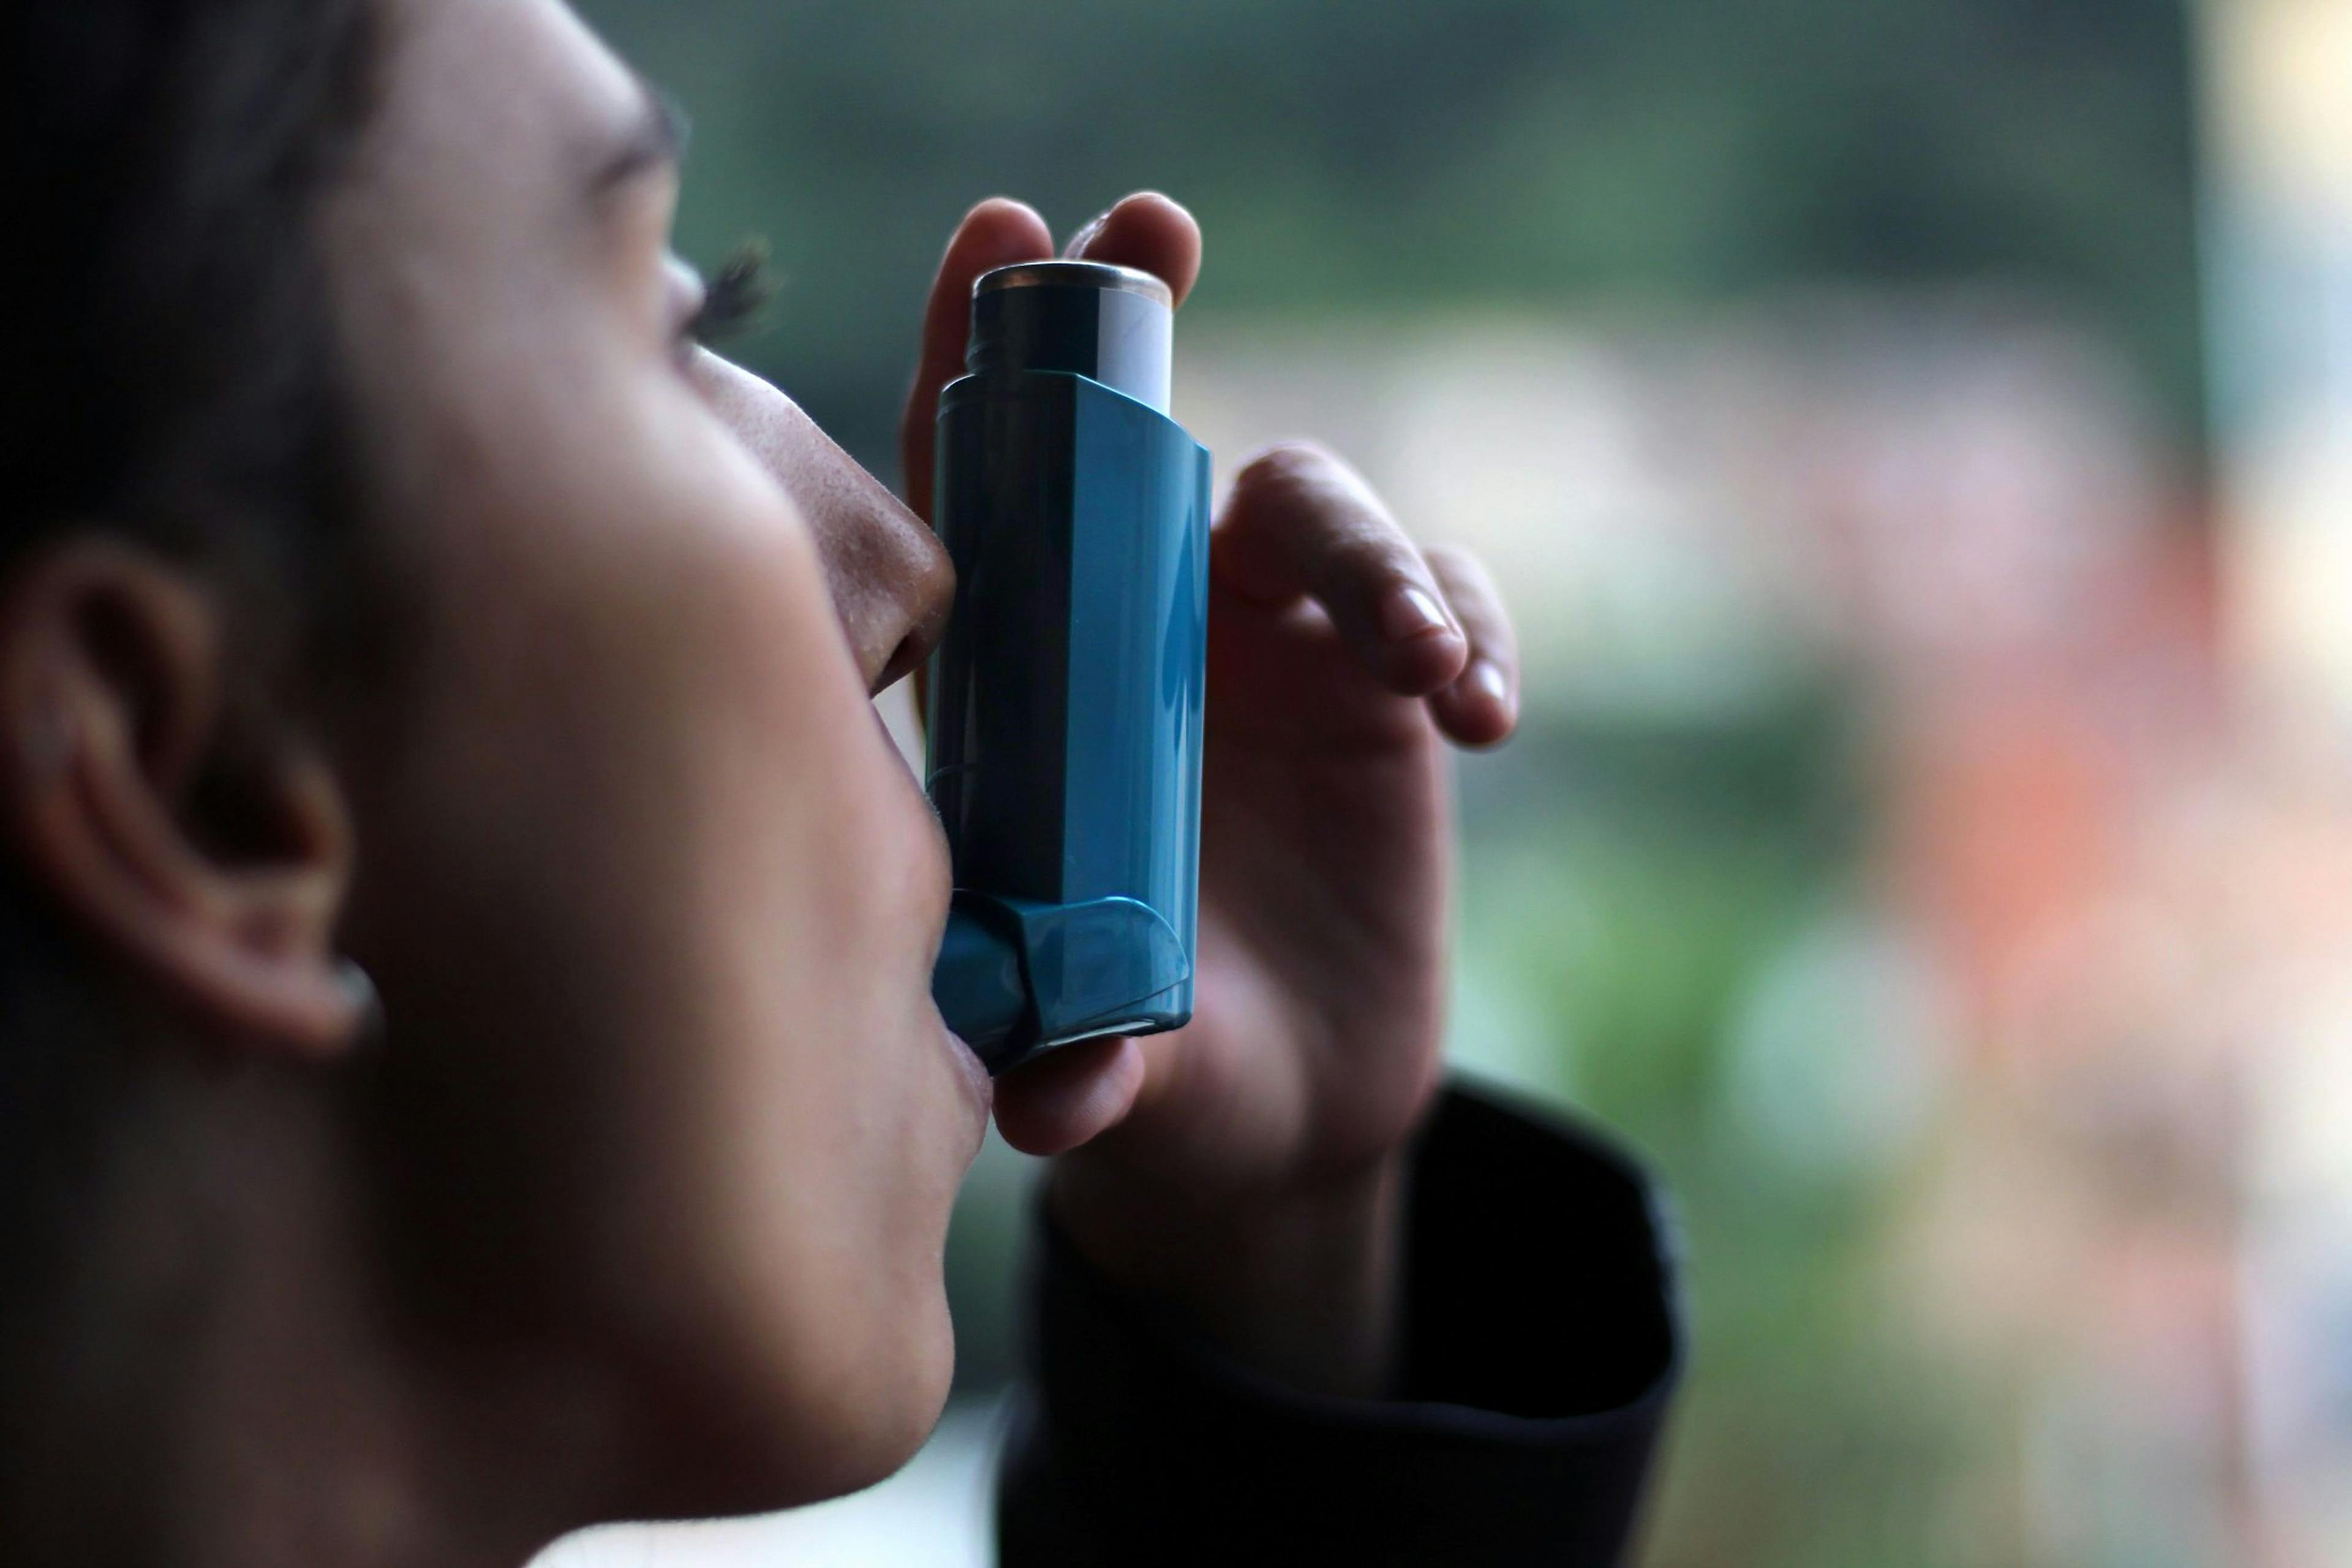 Health and medicine - Young girl using blue asthma inhaler to prevent an asthma attack | Image credit: © DALU11 - stock.adobe.com